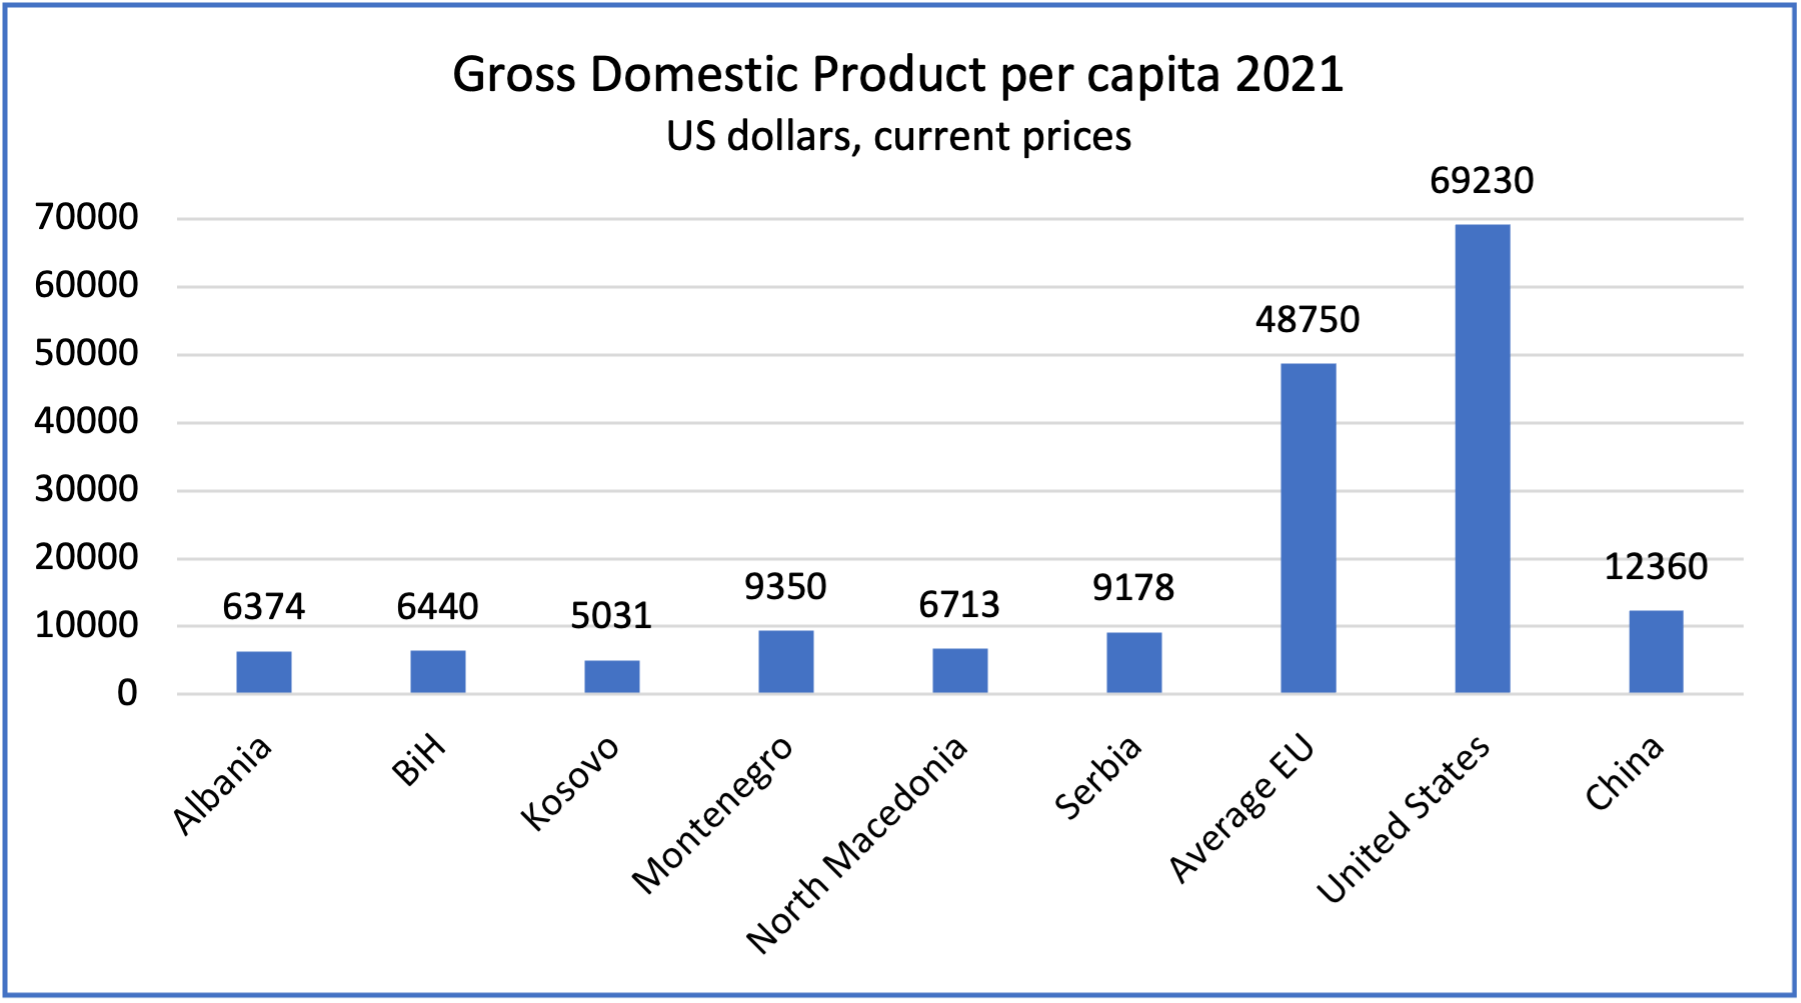 Gross Domestic Product per capita: Western Balkans compared with selected countries